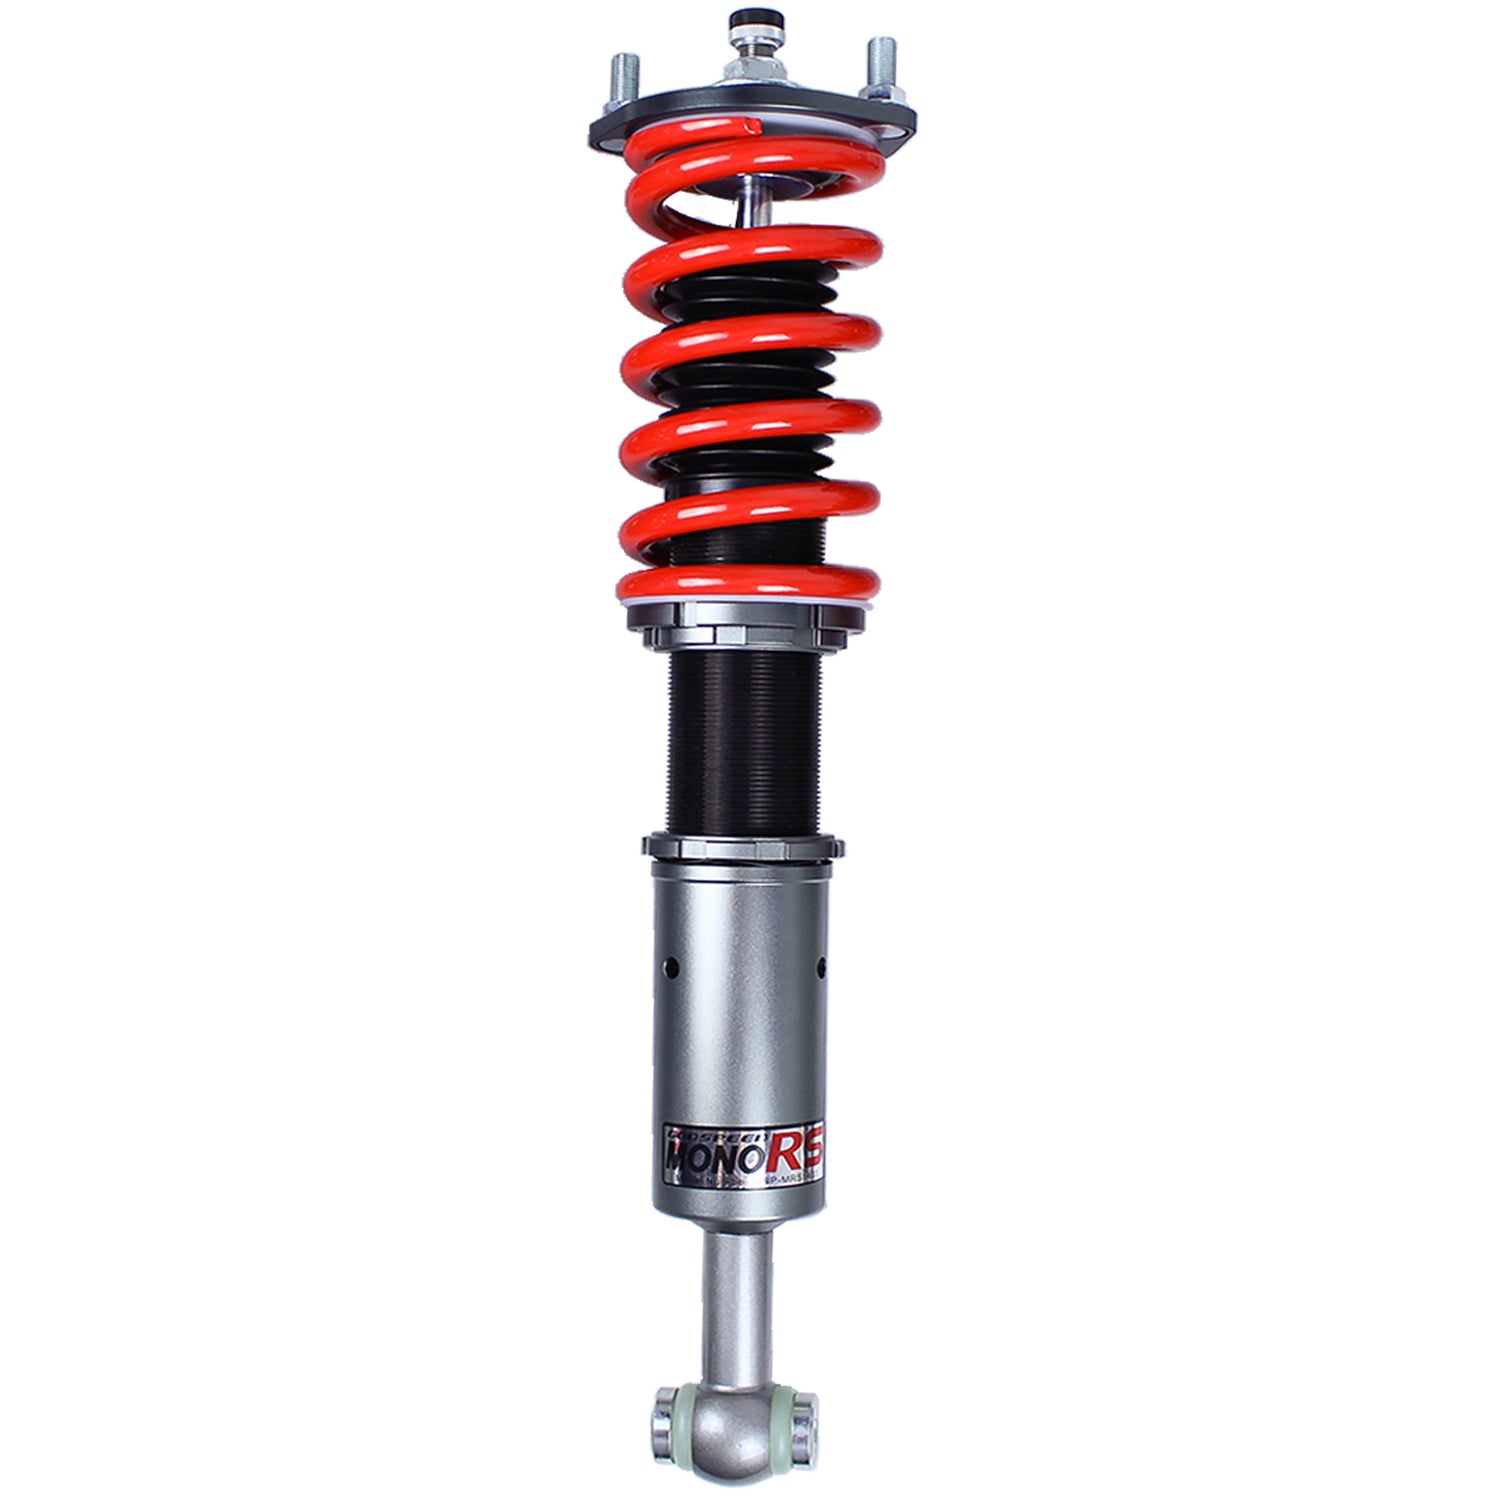 Godspeed MRS1403 MonoRS Coilover Lowering Kit, 32 Damping Adjustment, Ride Height Adjustable